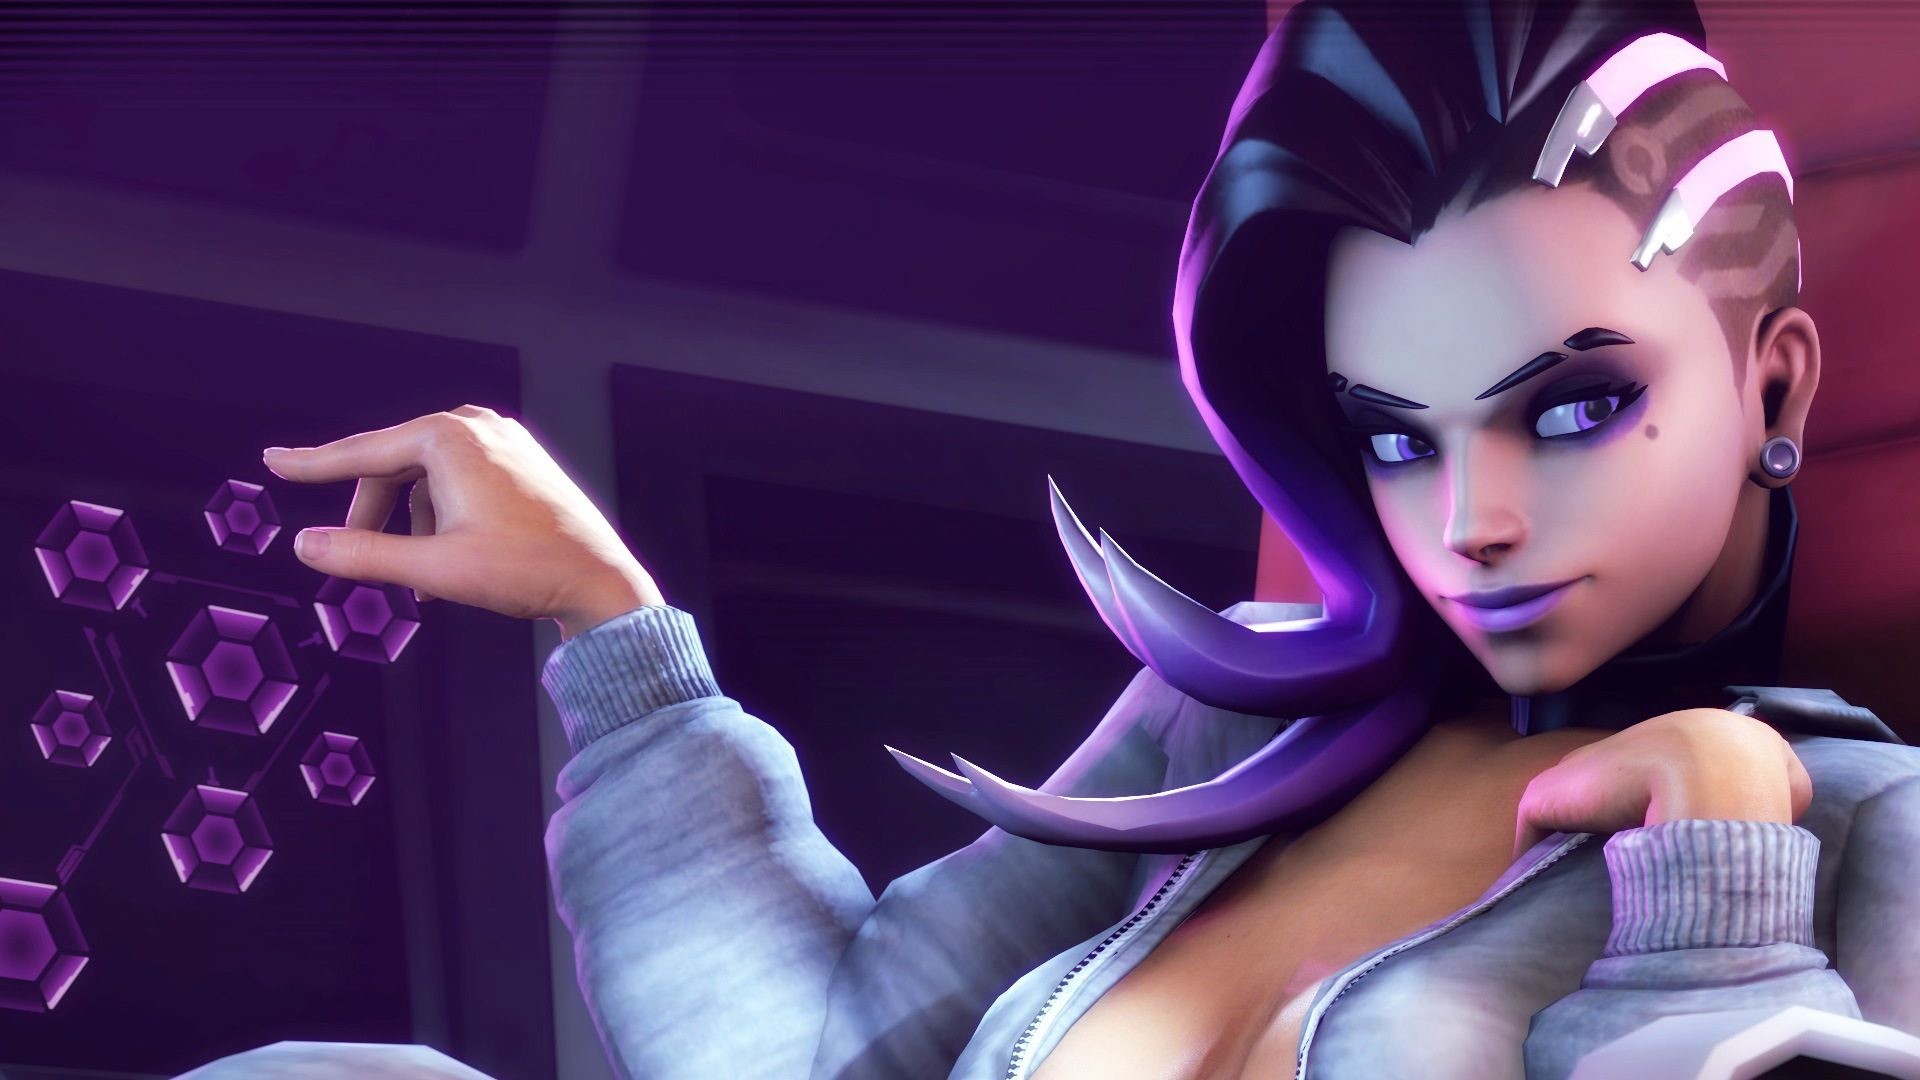 1920x1080 Sombra Sexy Gamegirl is a high definition desktop wallpaper from our  collection of free background images